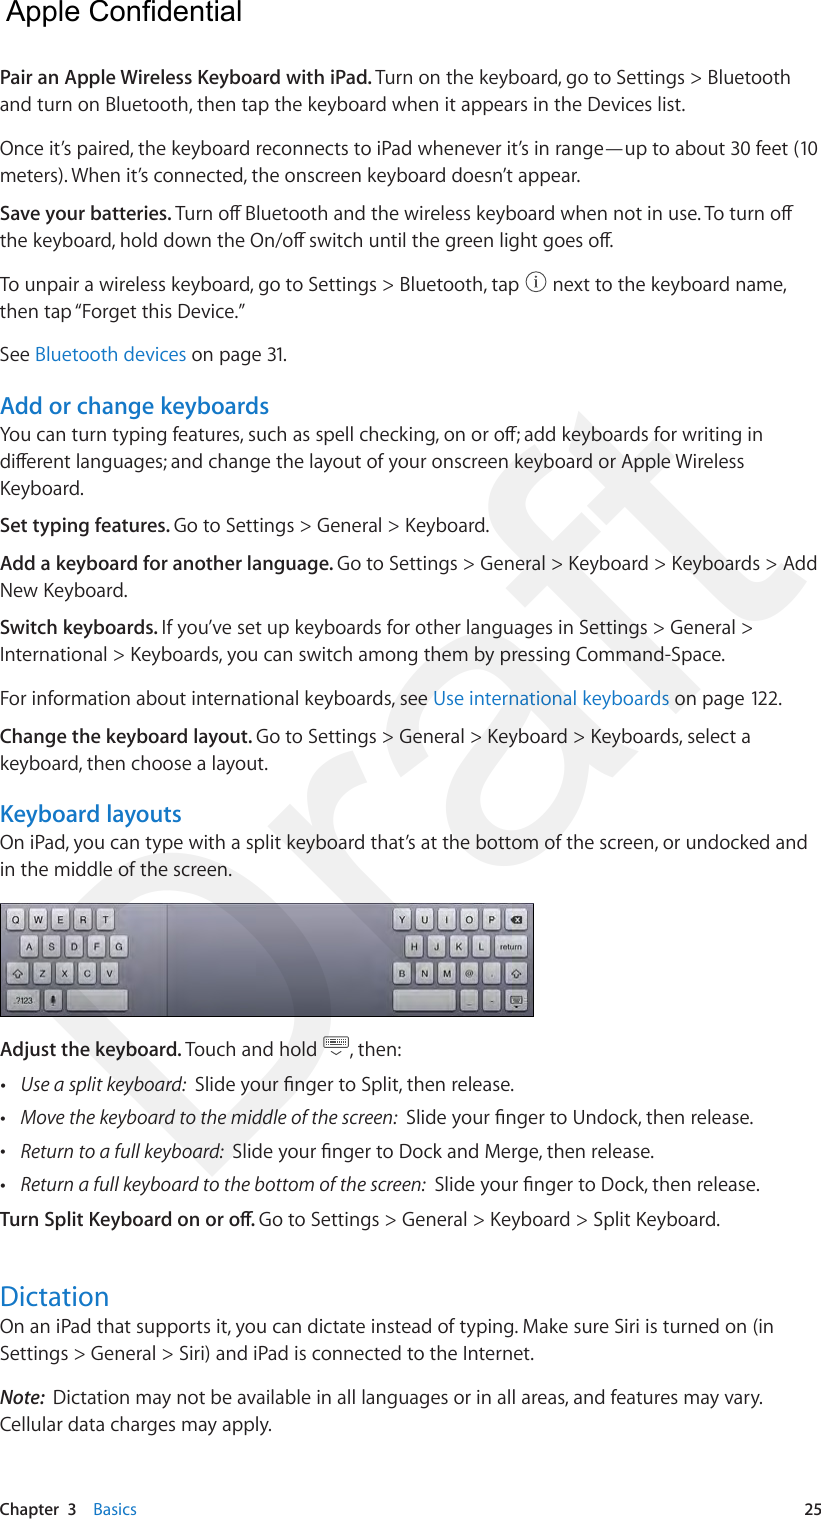 Chapter  3    Basics  25Pair an Apple Wireless Keyboard with iPad. Turn on the keyboard, go to Settings &gt; Bluetooth and turn on Bluetooth, then tap the keyboard when it appears in the Devices list.Once it’s paired, the keyboard reconnects to iPad whenever it’s in range—up to about 30 feet (10 meters). When it’s connected, the onscreen keyboard doesn’t appear.Save your batteries. Turn o Bluetooth and the wireless keyboard when not in use. To turn o the keyboard, hold down the On/o switch until the green light goes o.To unpair a wireless keyboard, go to Settings &gt; Bluetooth, tap   next to the keyboard name, then tap “Forget this Device.”See Bluetooth devices on page 31.Add or change keyboardsYou can turn typing features, such as spell checking, on or o; add keyboards for writing in dierent languages; and change the layout of your onscreen keyboard or Apple Wireless Keyboard. Set typing features. Go to Settings &gt; General &gt; Keyboard. Add a keyboard for another language. Go to Settings &gt; General &gt; Keyboard &gt; Keyboards &gt; Add New Keyboard.Switch keyboards. If you’ve set up keyboards for other languages in Settings &gt; General &gt; International &gt; Keyboards, you can switch among them by pressing Command-Space.For information about international keyboards, see Use international keyboards on page 122.Change the keyboard layout. Go to Settings &gt; General &gt; Keyboard &gt; Keyboards, select a keyboard, then choose a layout. Keyboard layoutsOn iPad, you can type with a split keyboard that’s at the bottom of the screen, or undocked and in the middle of the screen. Adjust the keyboard. Touch and hold  , then: •Use a split keyboard:  Slide your nger to Split, then release. •Move the keyboard to the middle of the screen:  Slide your nger to Undock, then release. •Return to a full keyboard:  Slide your nger to Dock and Merge, then release. •Return a full keyboard to the bottom of the screen:  Slide your nger to Dock, then release.Turn Split Keyboard on or o. Go to Settings &gt; General &gt; Keyboard &gt; Split Keyboard.DictationOn an iPad that supports it, you can dictate instead of typing. Make sure Siri is turned on (in Settings &gt; General &gt; Siri) and iPad is connected to the Internet.Note:  Dictation may not be available in all languages or in all areas, and features may vary. Cellular data charges may apply.  Apple Confidential Draft